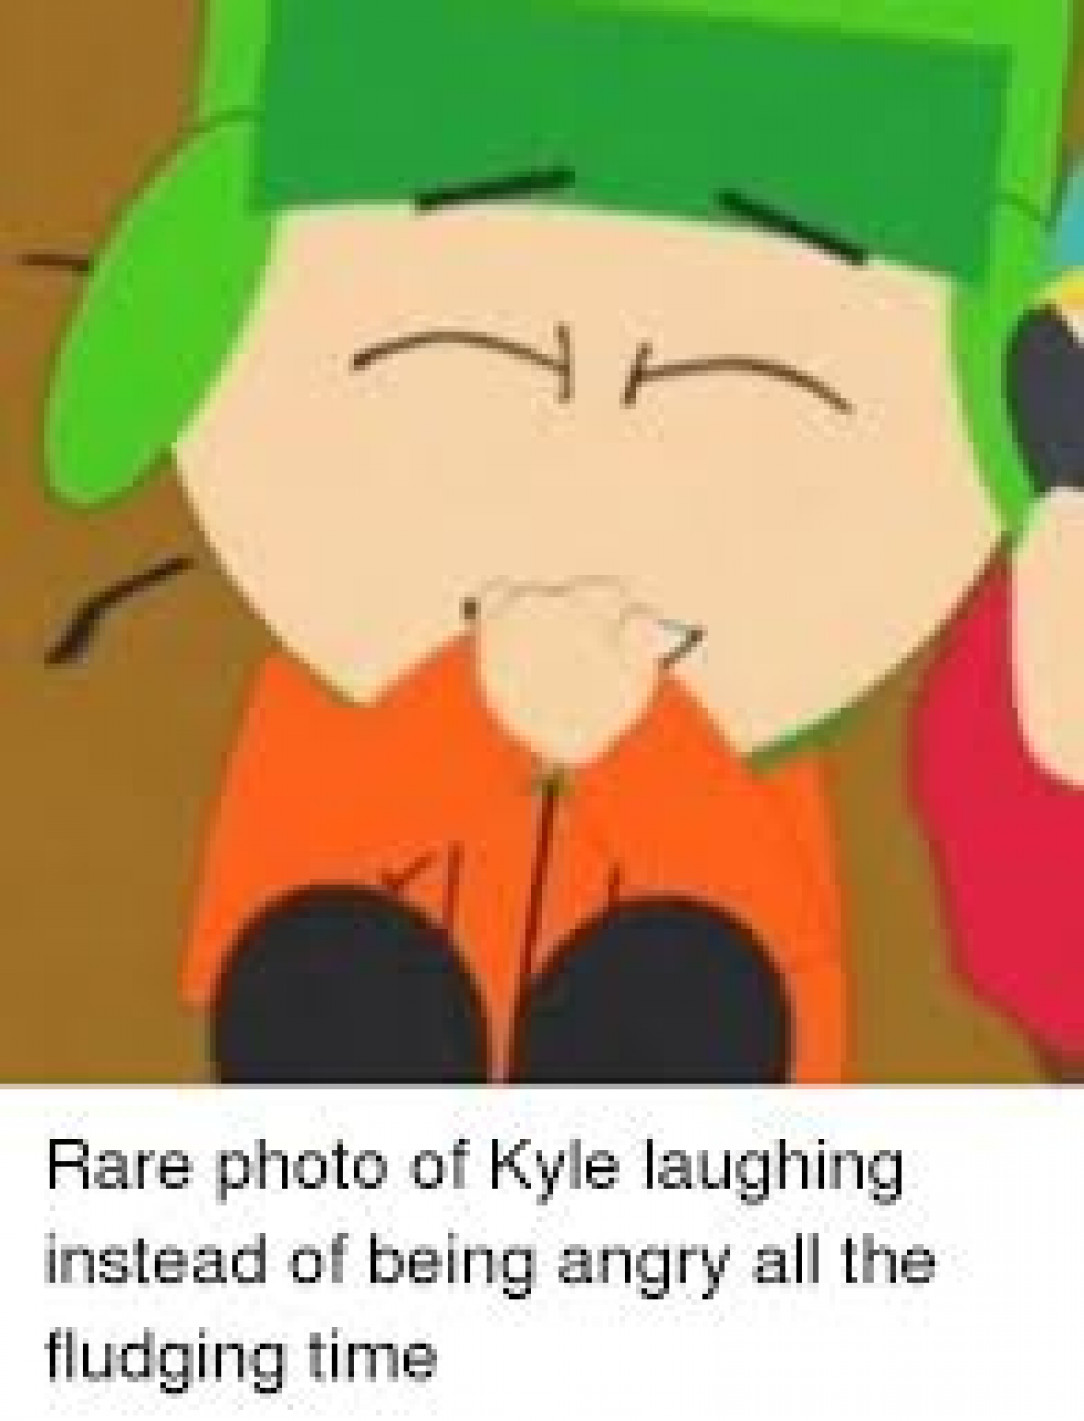 Kyle laughing is so precious